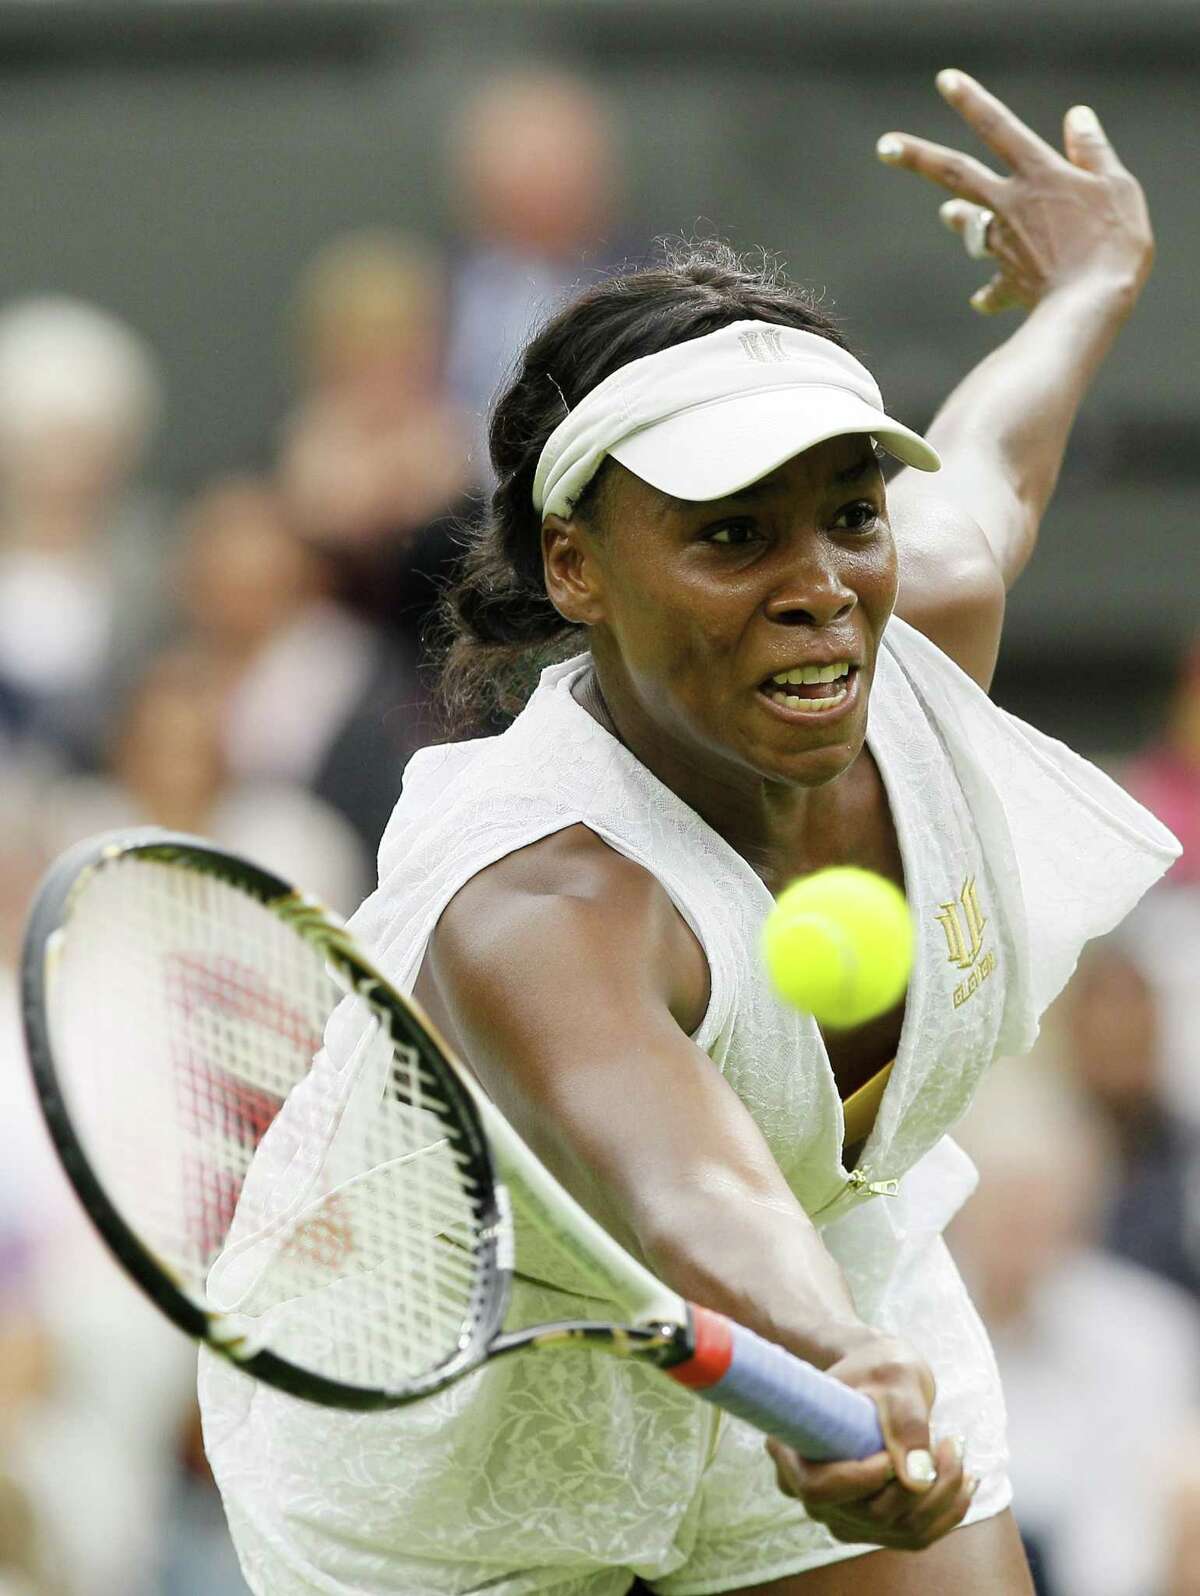 Venus Williams of the US in action during the match against Japan's Kimiko Date-Krumm at the All England Lawn Tennis Championships at Wimbledon, Wednesday, June 22, 2011. (AP Photo/Kirsty Wigglesworth)